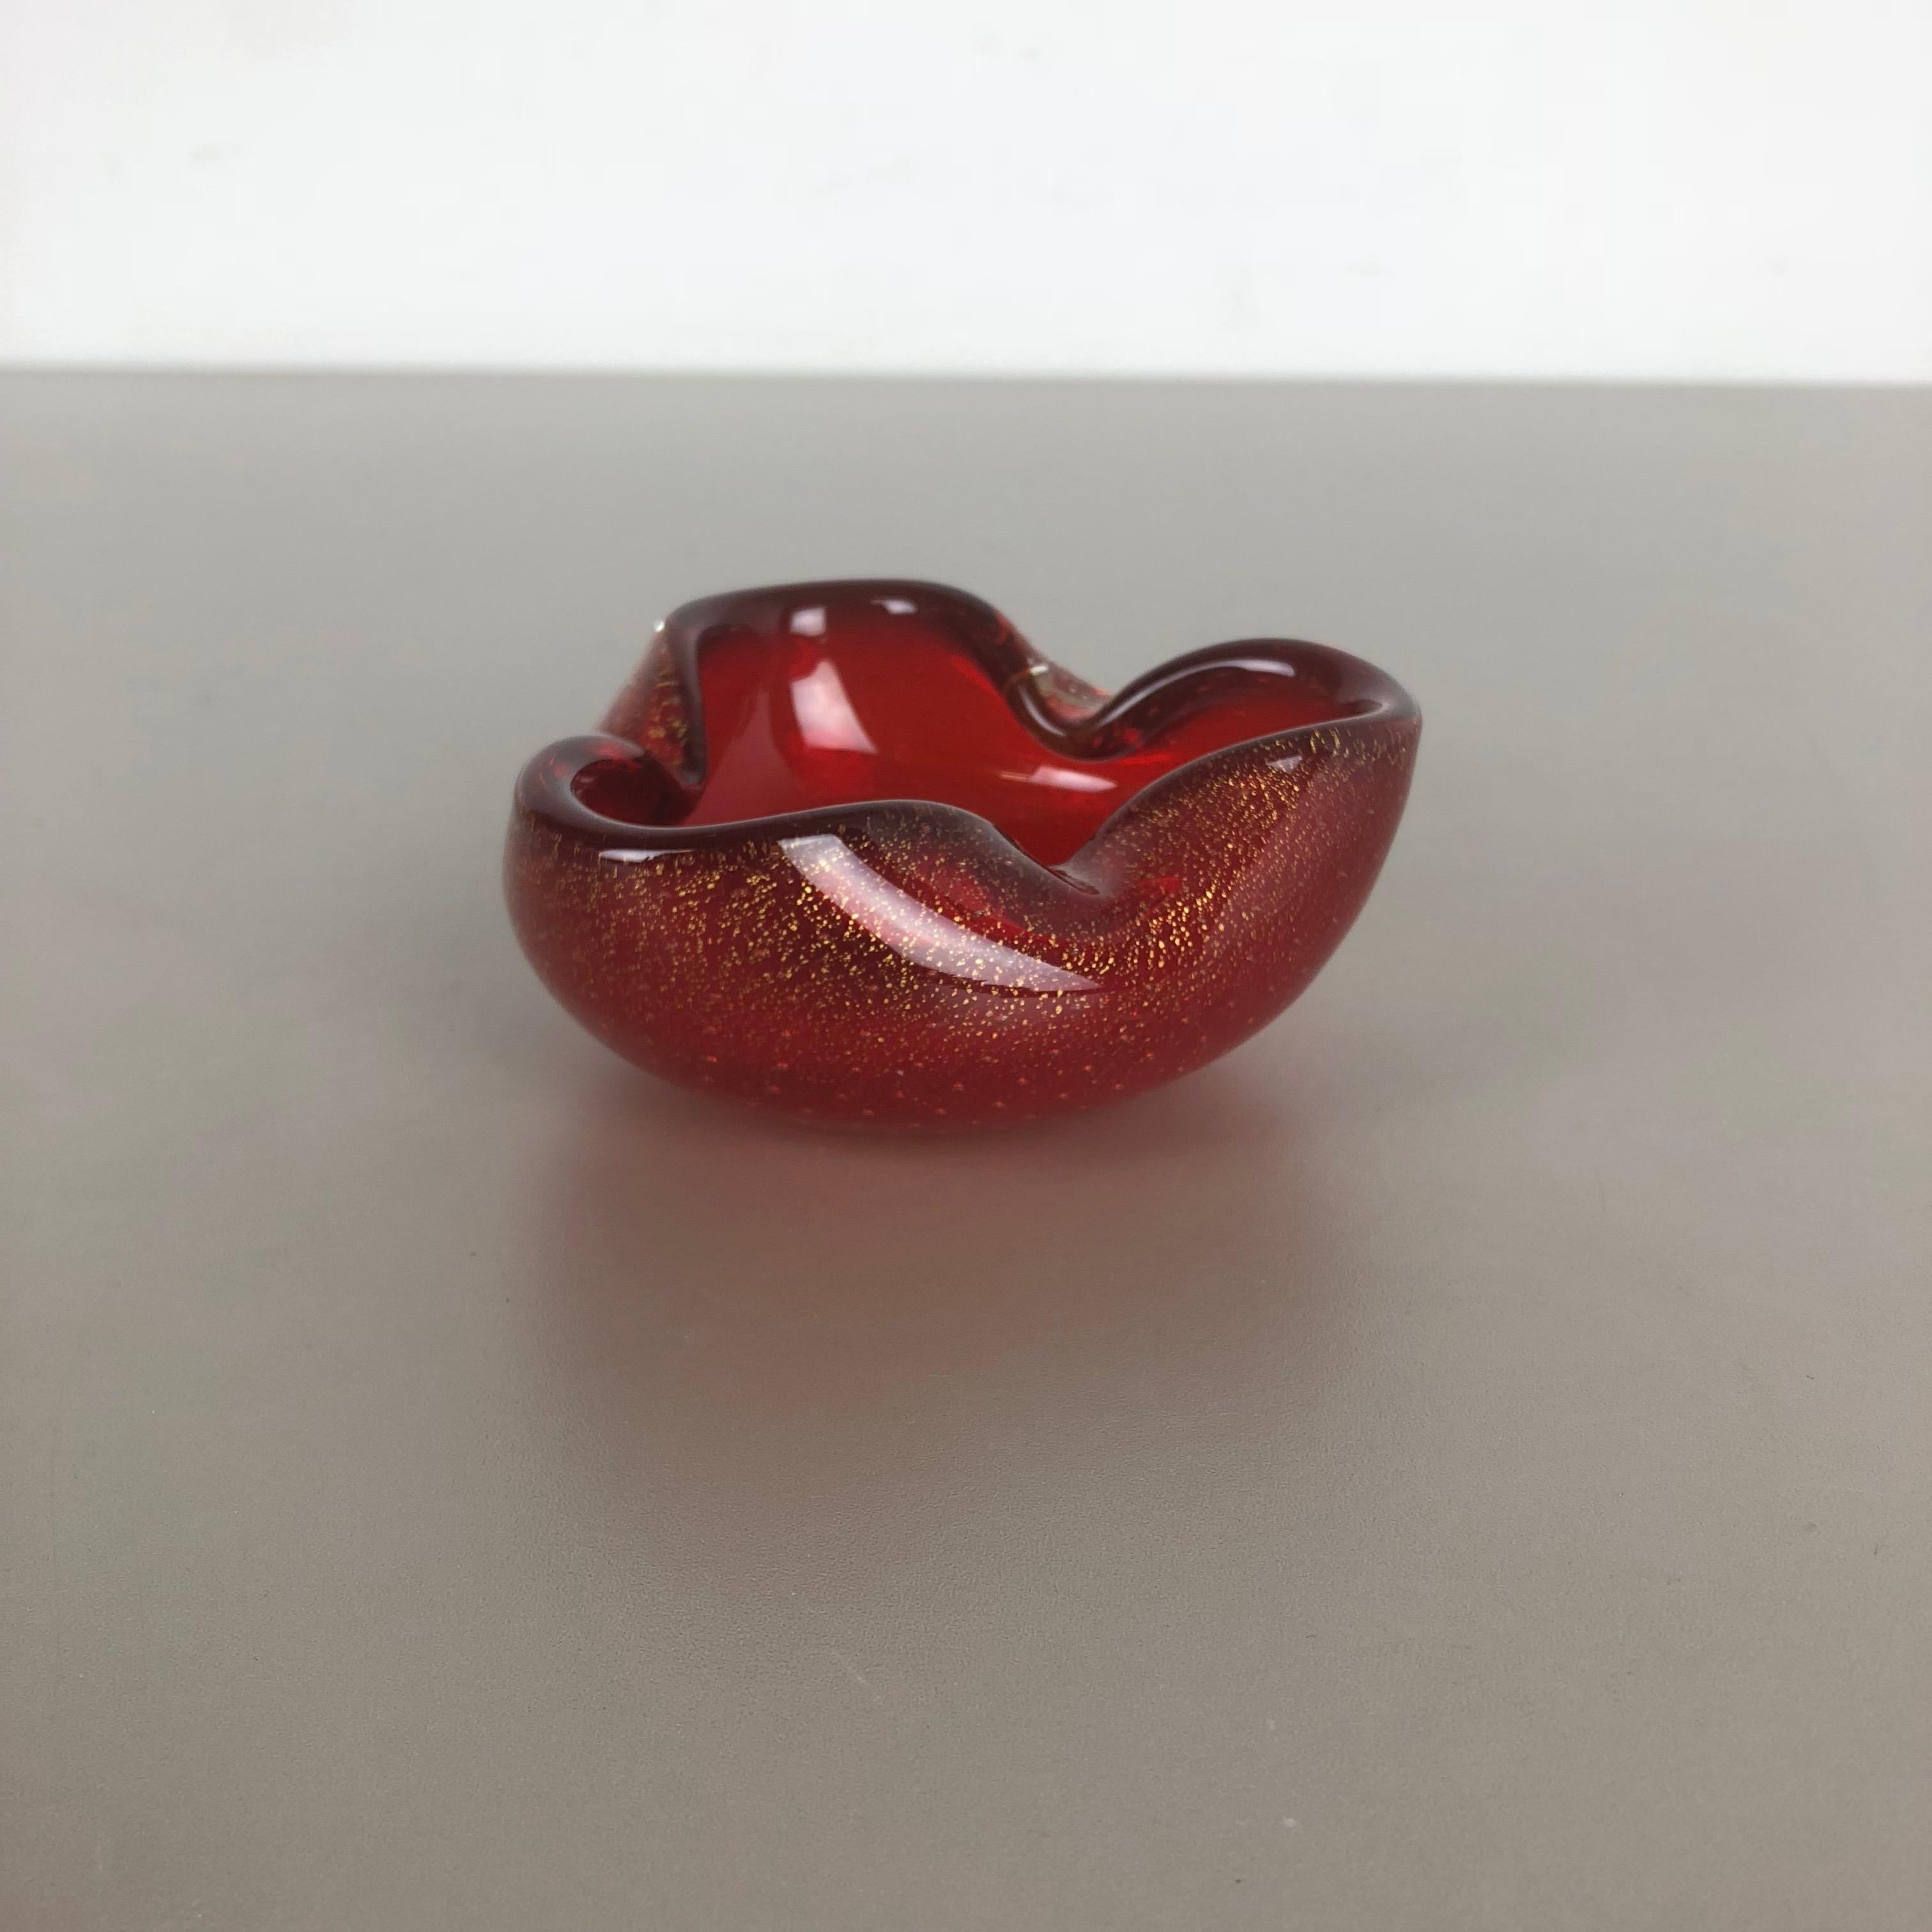 Article:

Murano glass bowl, ashtray element


Origin:

Murano, Italy


Decade:

1970s



This original vintage glass bowl element, ash tray was produced in the 1970s in Murano, Italy. It is made in high quality Murano technique and